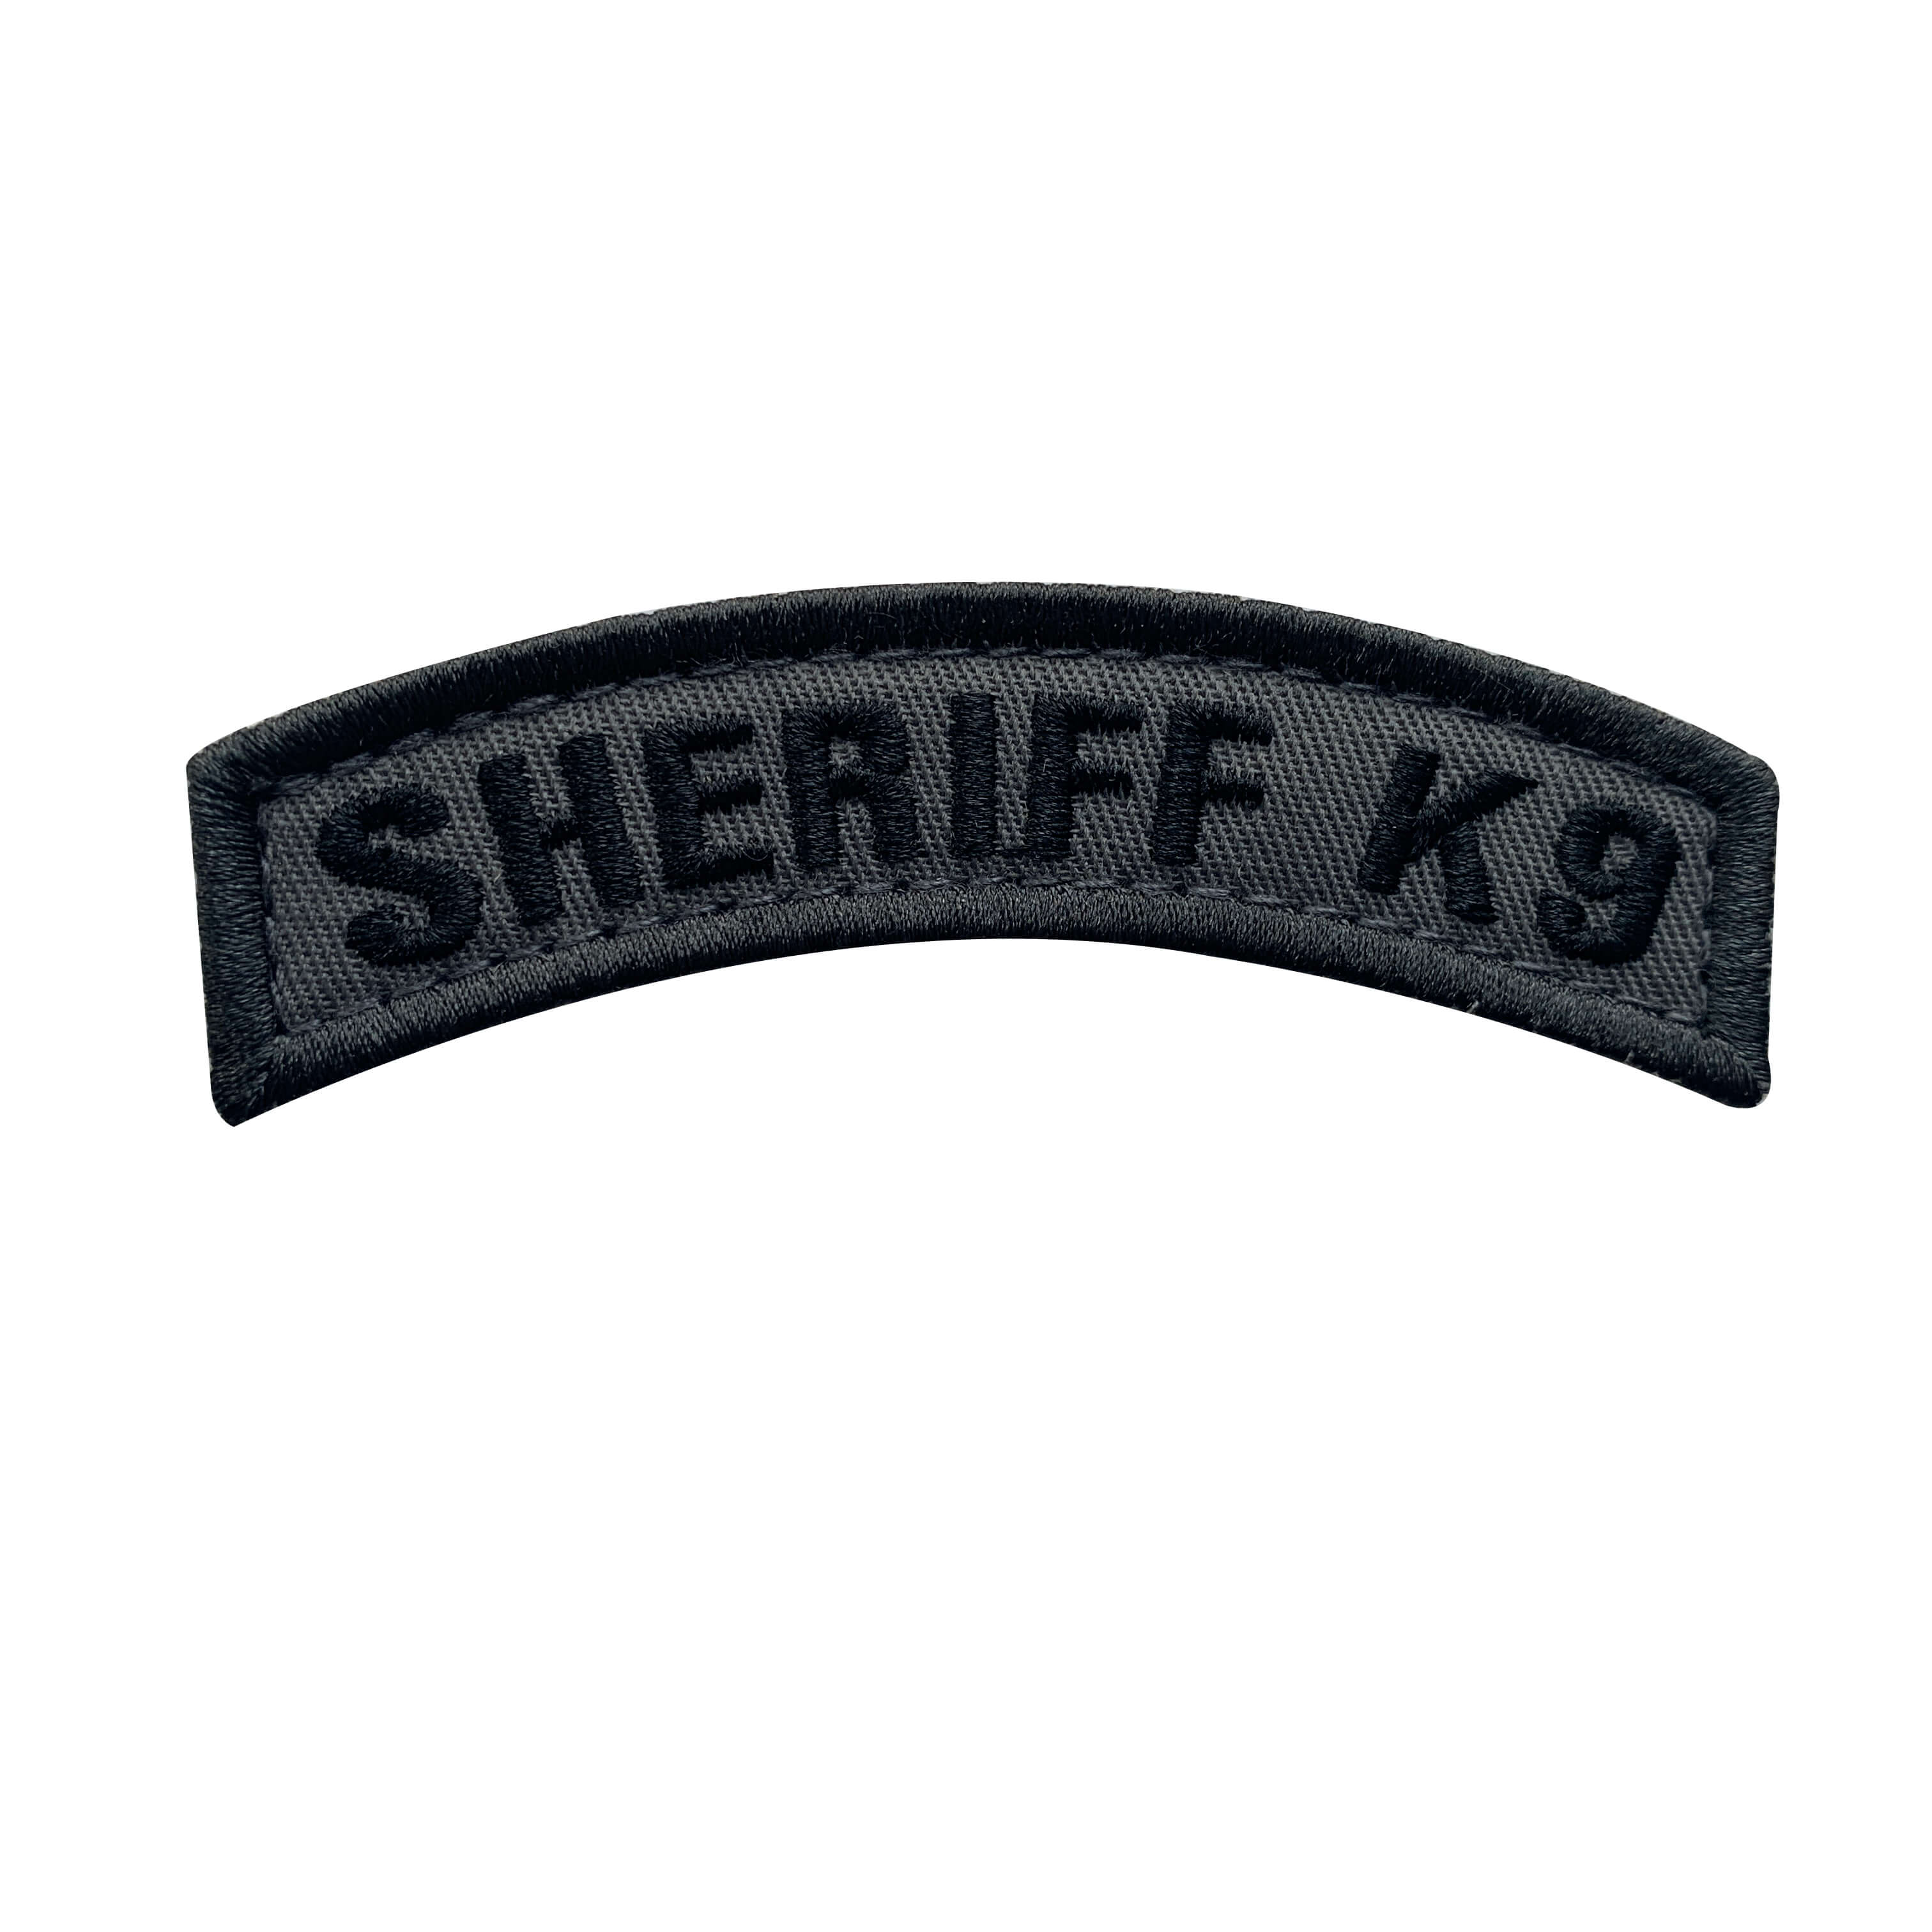 uuKen 6x2 inches Big Sheriff Dept PVC Patch 2x6 inch for Tactical Vest